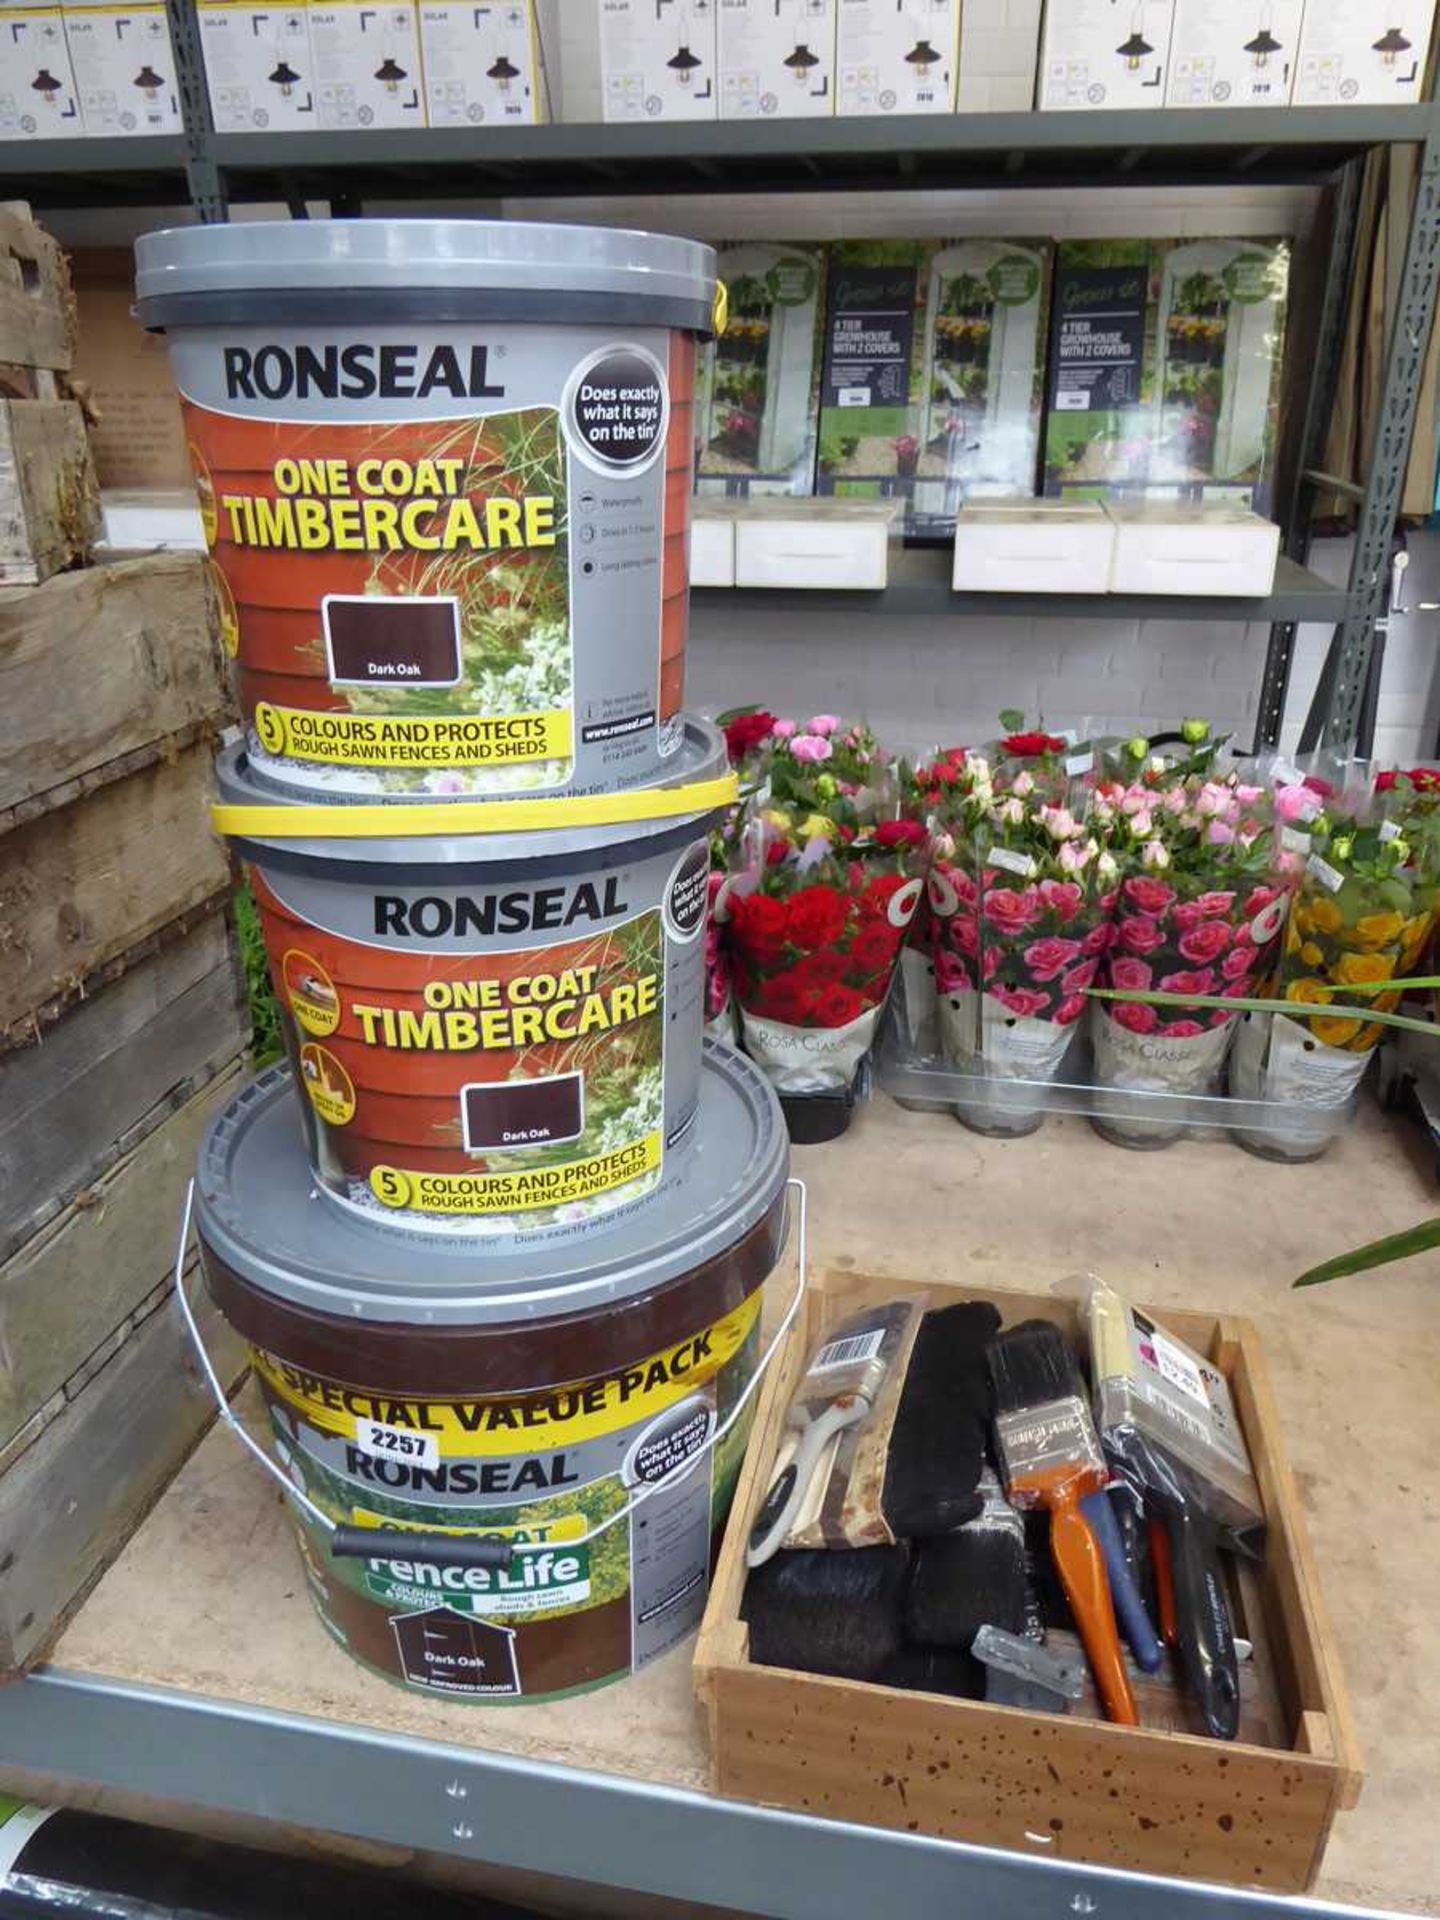 3 tubs of Ronseal 1 coat timber care paint in dark oak together with small wooden crate of mixed